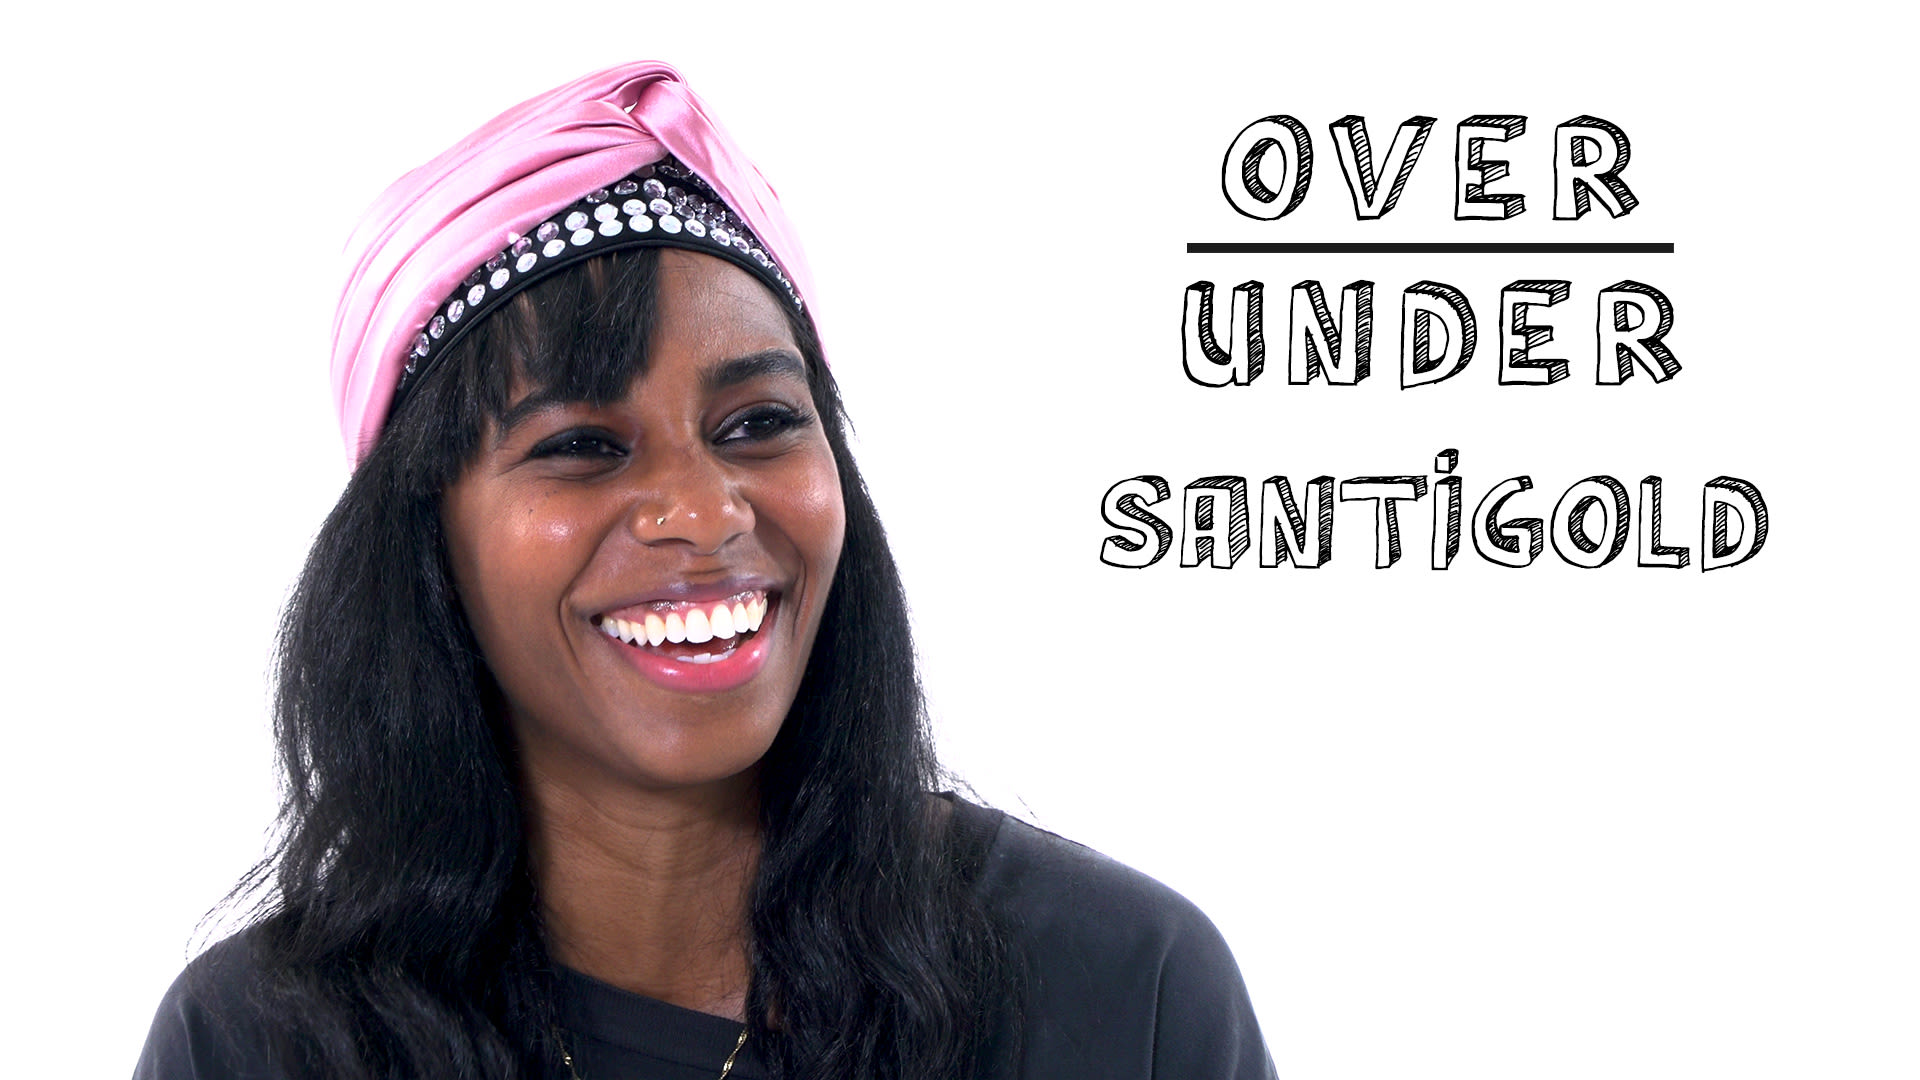 Watch Santigold Rates BeyoncÃ©'s Twins, Candy Corn, and Marvel Movies |  Over/Under | Pitchfork